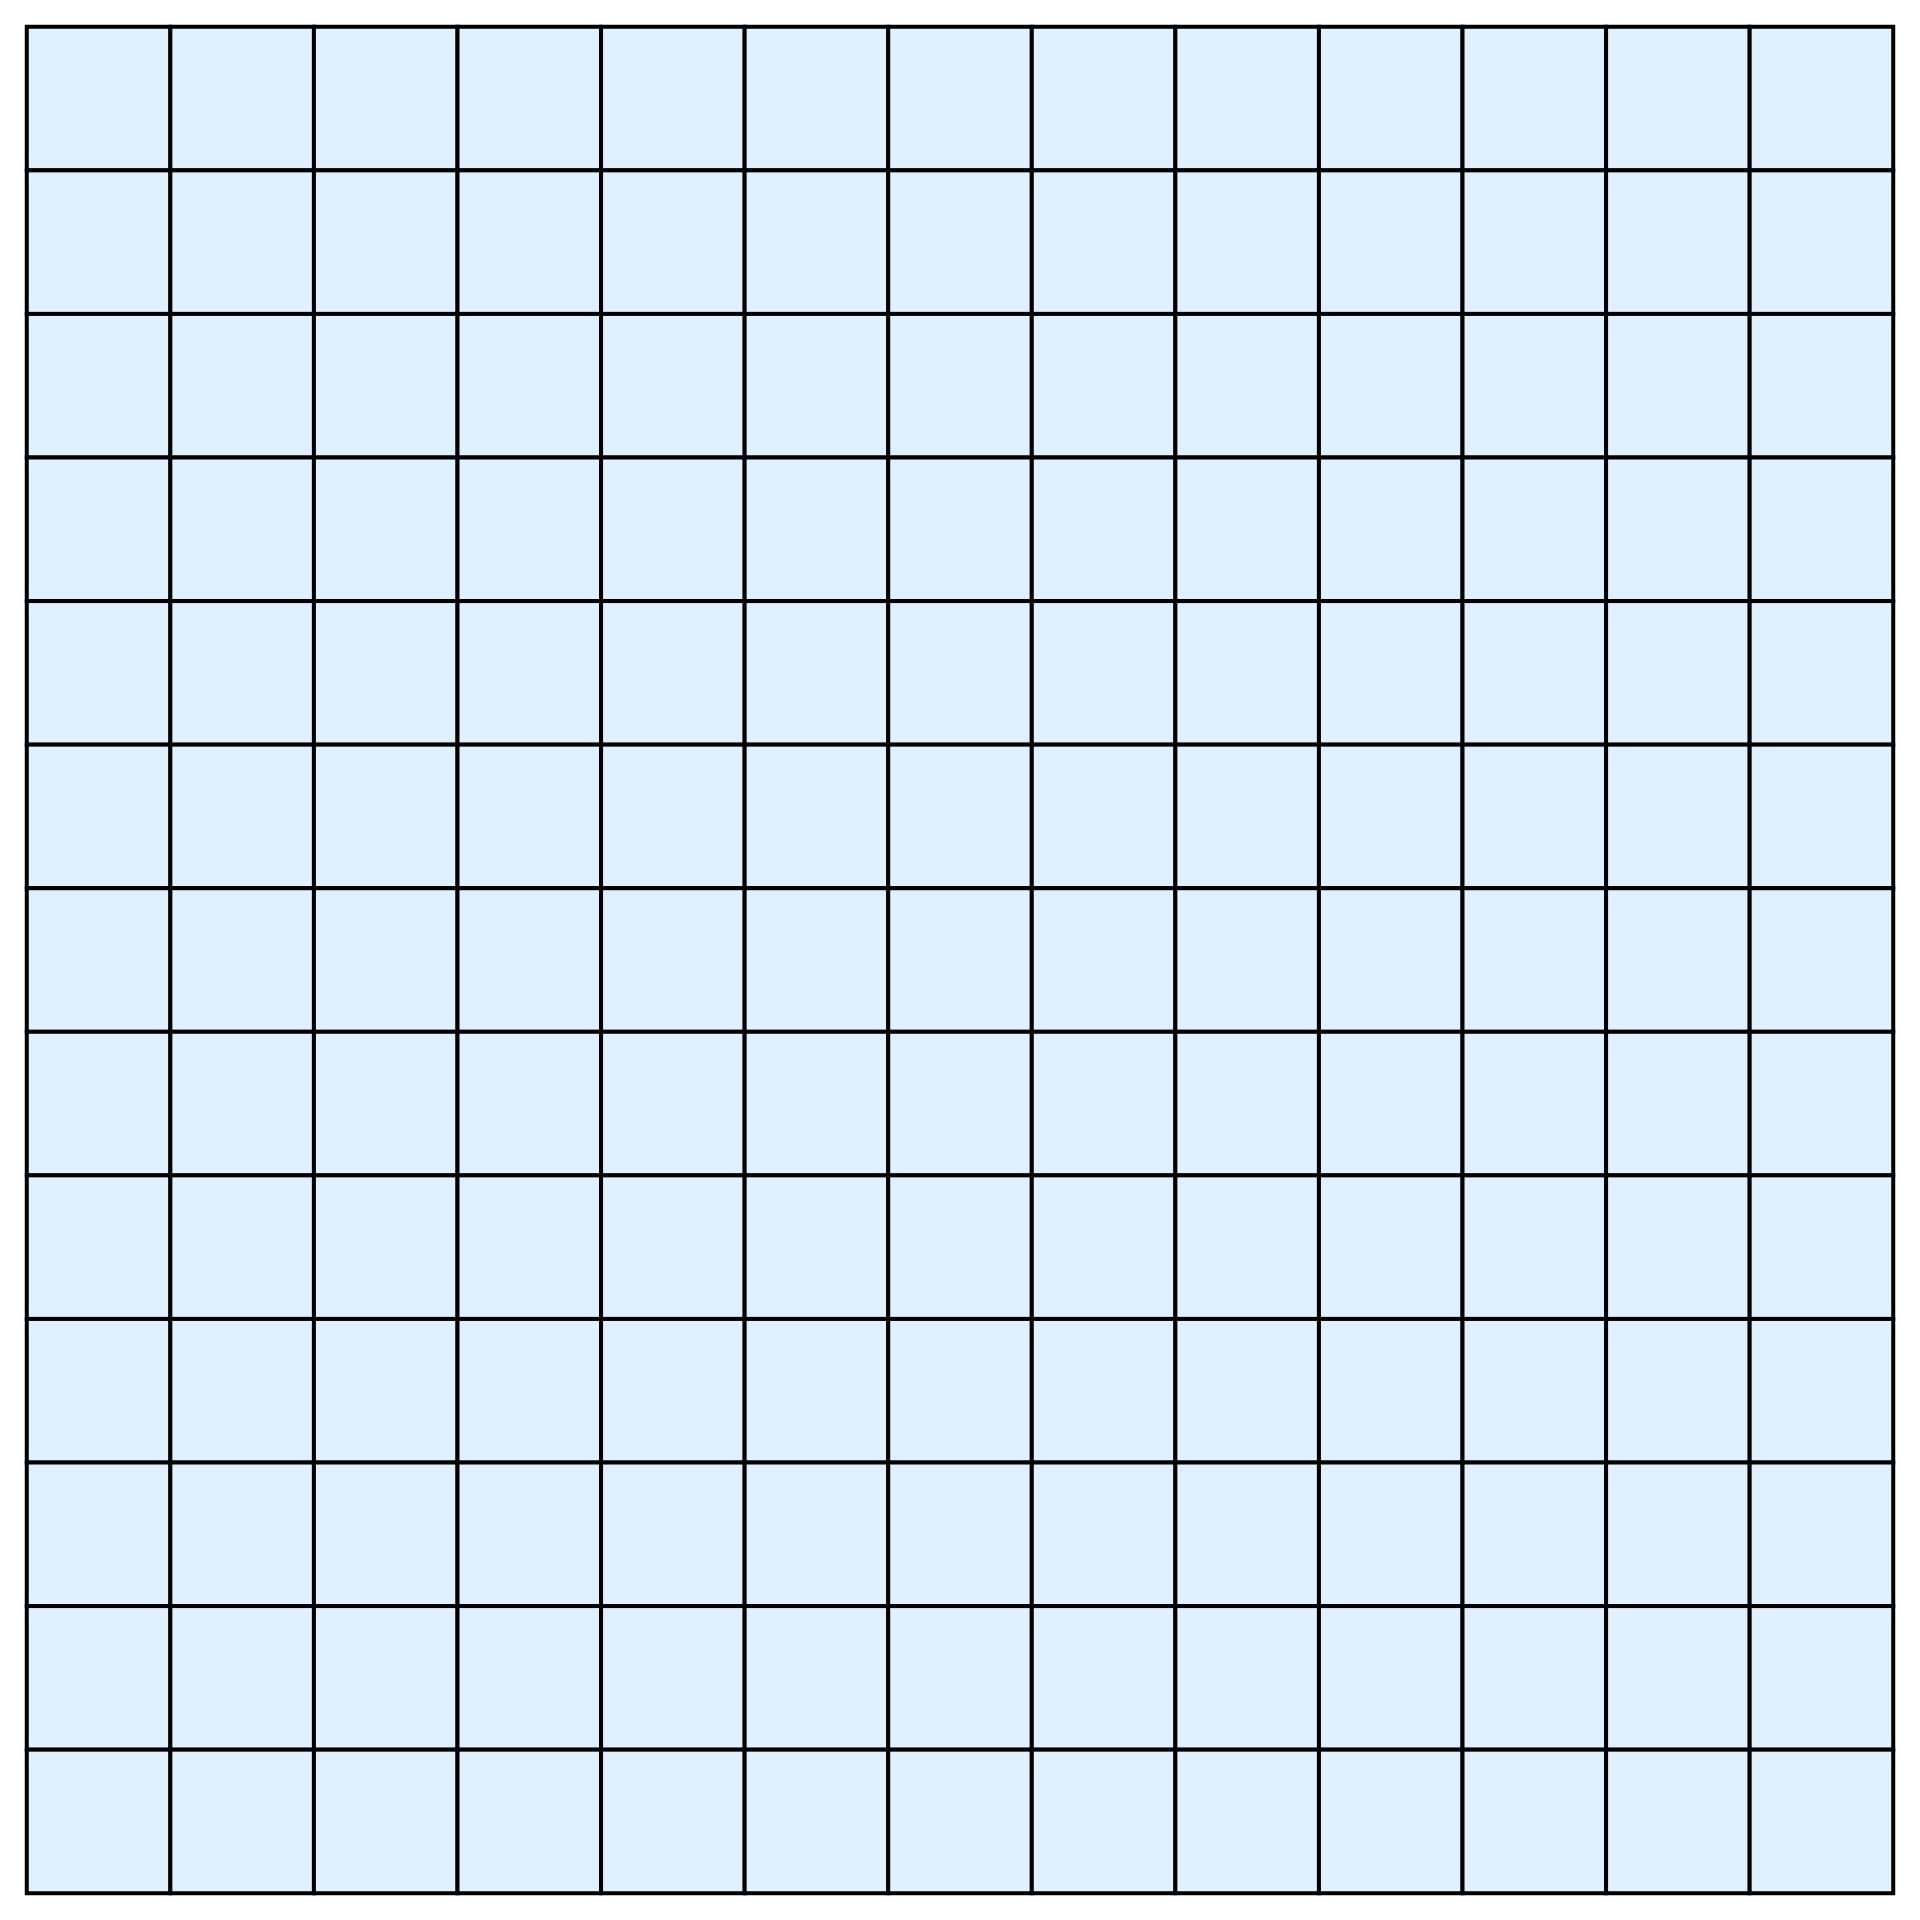 Printable Graphing Paper Sheet